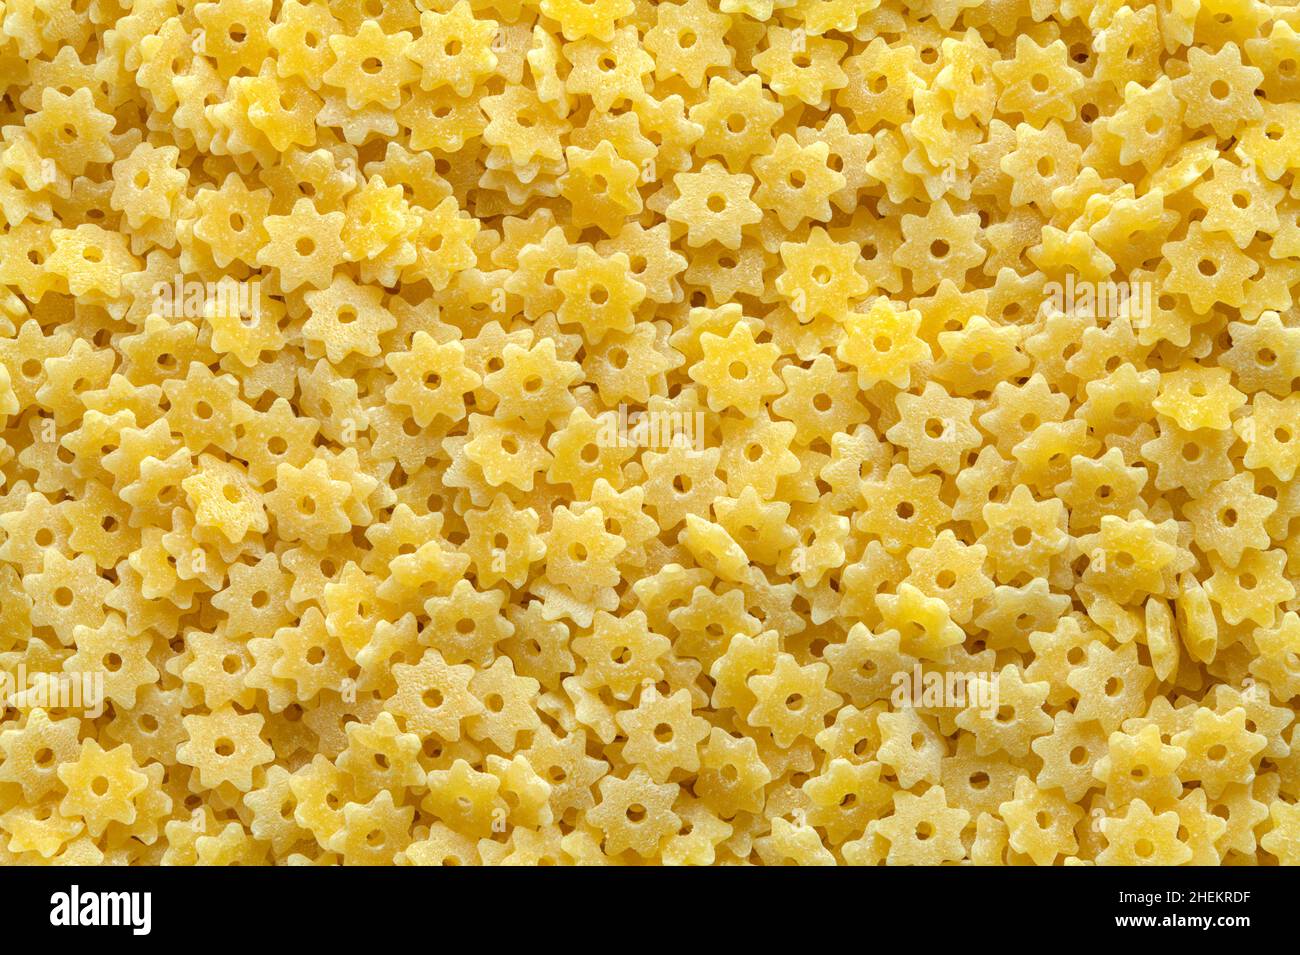 Large Pile of Dry Star Pasta Background Texture. Stock Photo